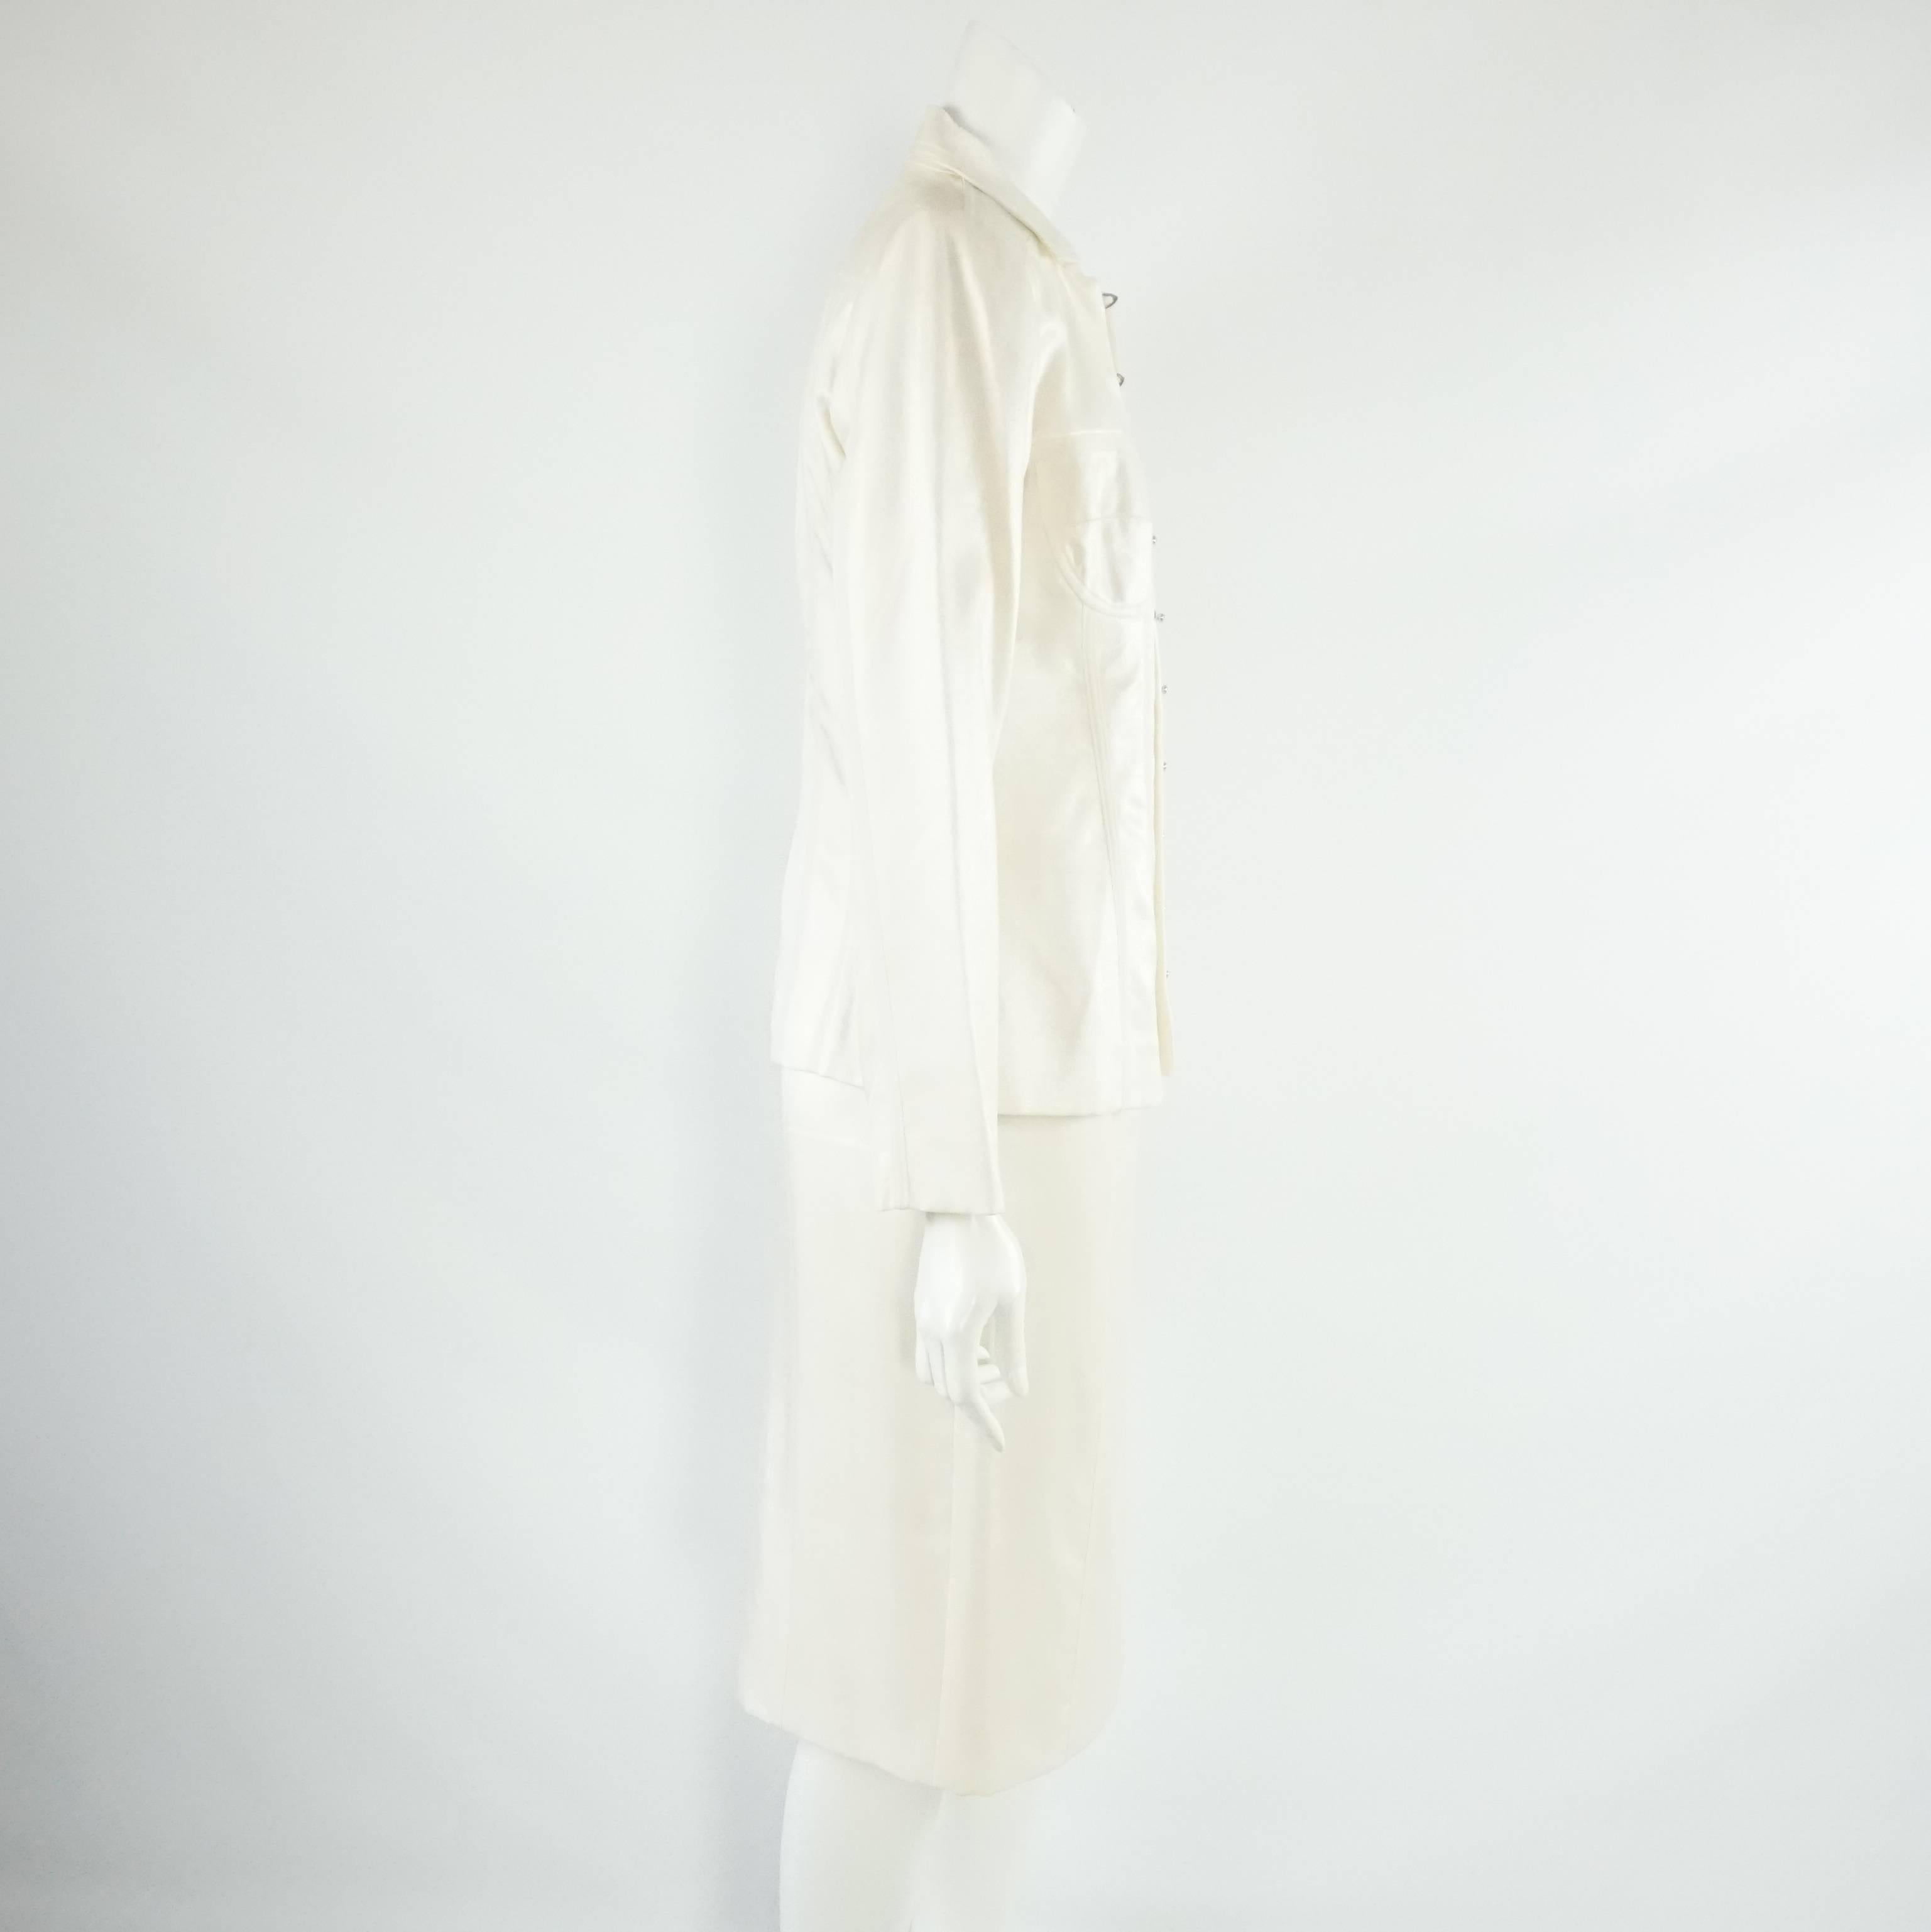 Christian Dior Ivory Wool Blend Dress and Jacket - 38 & 40. This Dior ivory set features a sleeveless wool blend dress with a v-neckline and a side slit. There is a matching jacket with silver closures. This set is in very good condition with minor